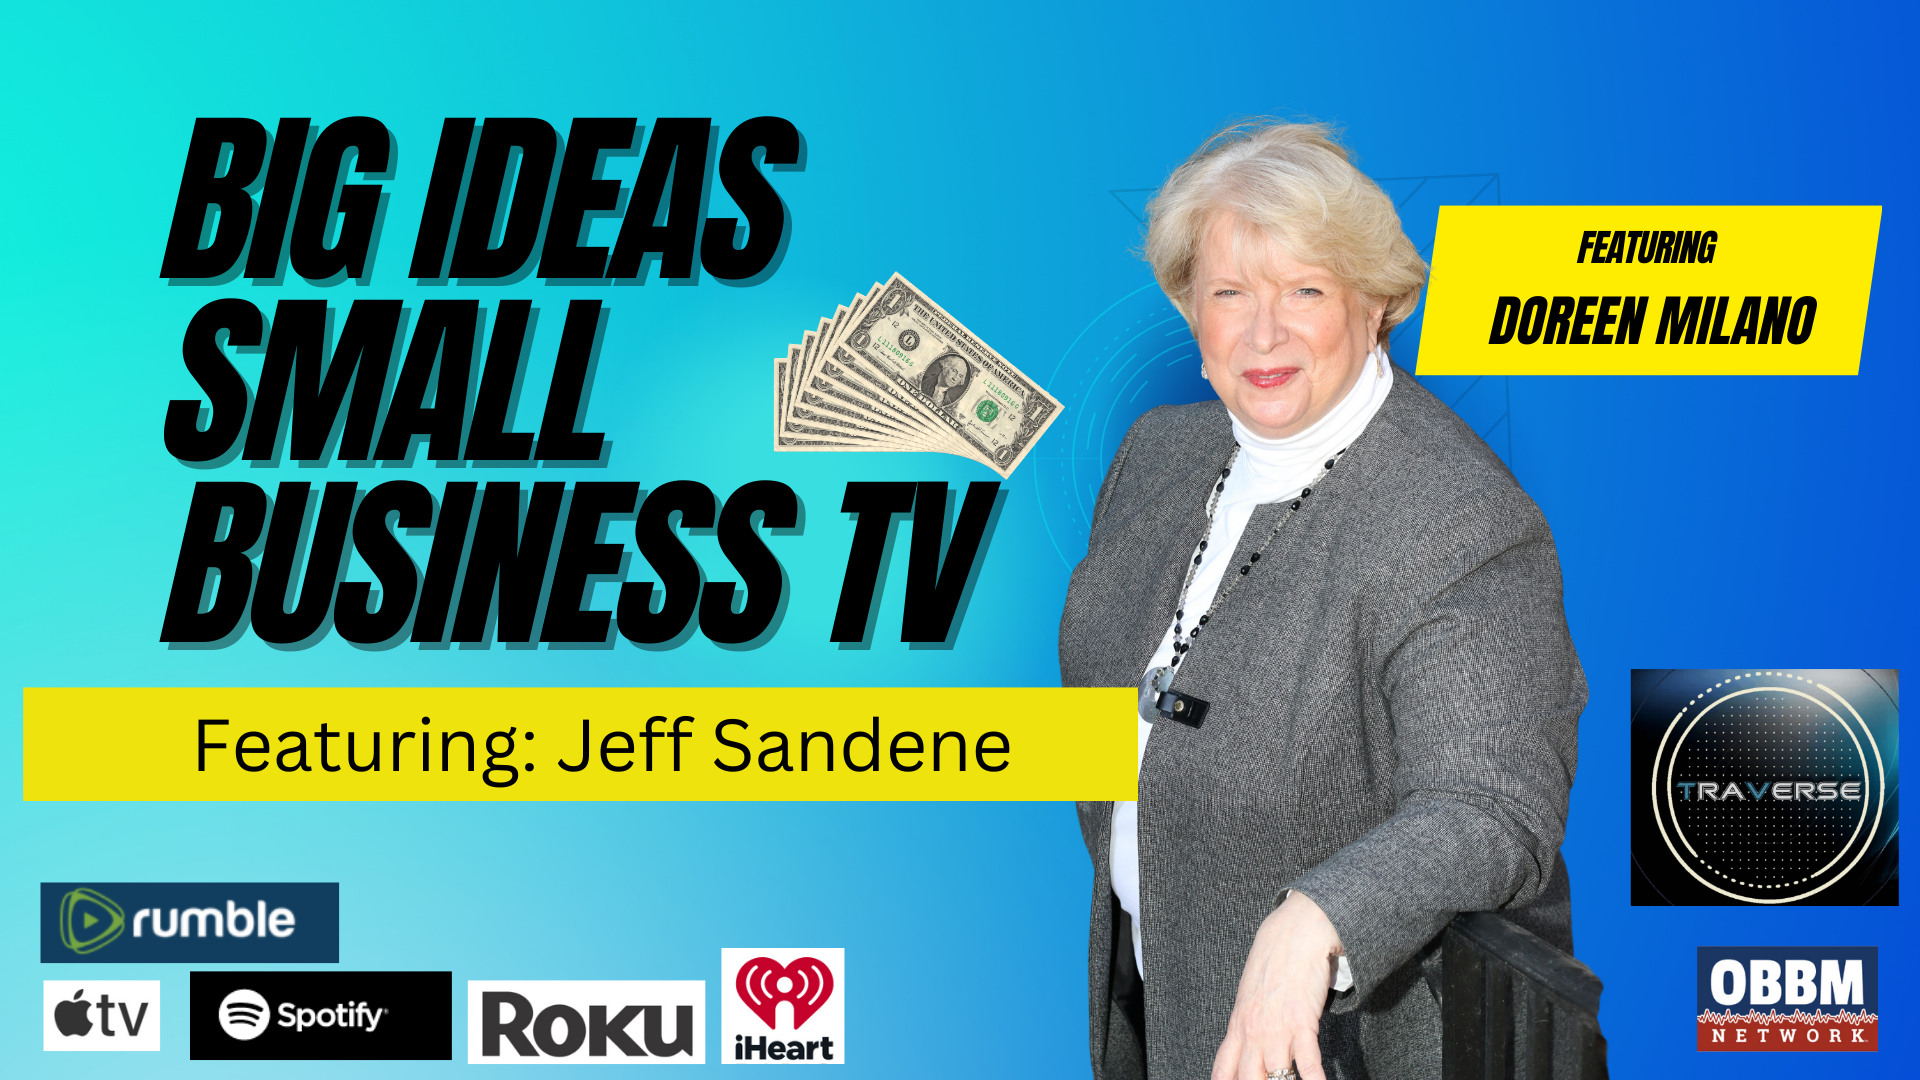 BISB19-Jeff Sandene on Building Legacy Business - Big Ideas, Small Business with Doreen Milano